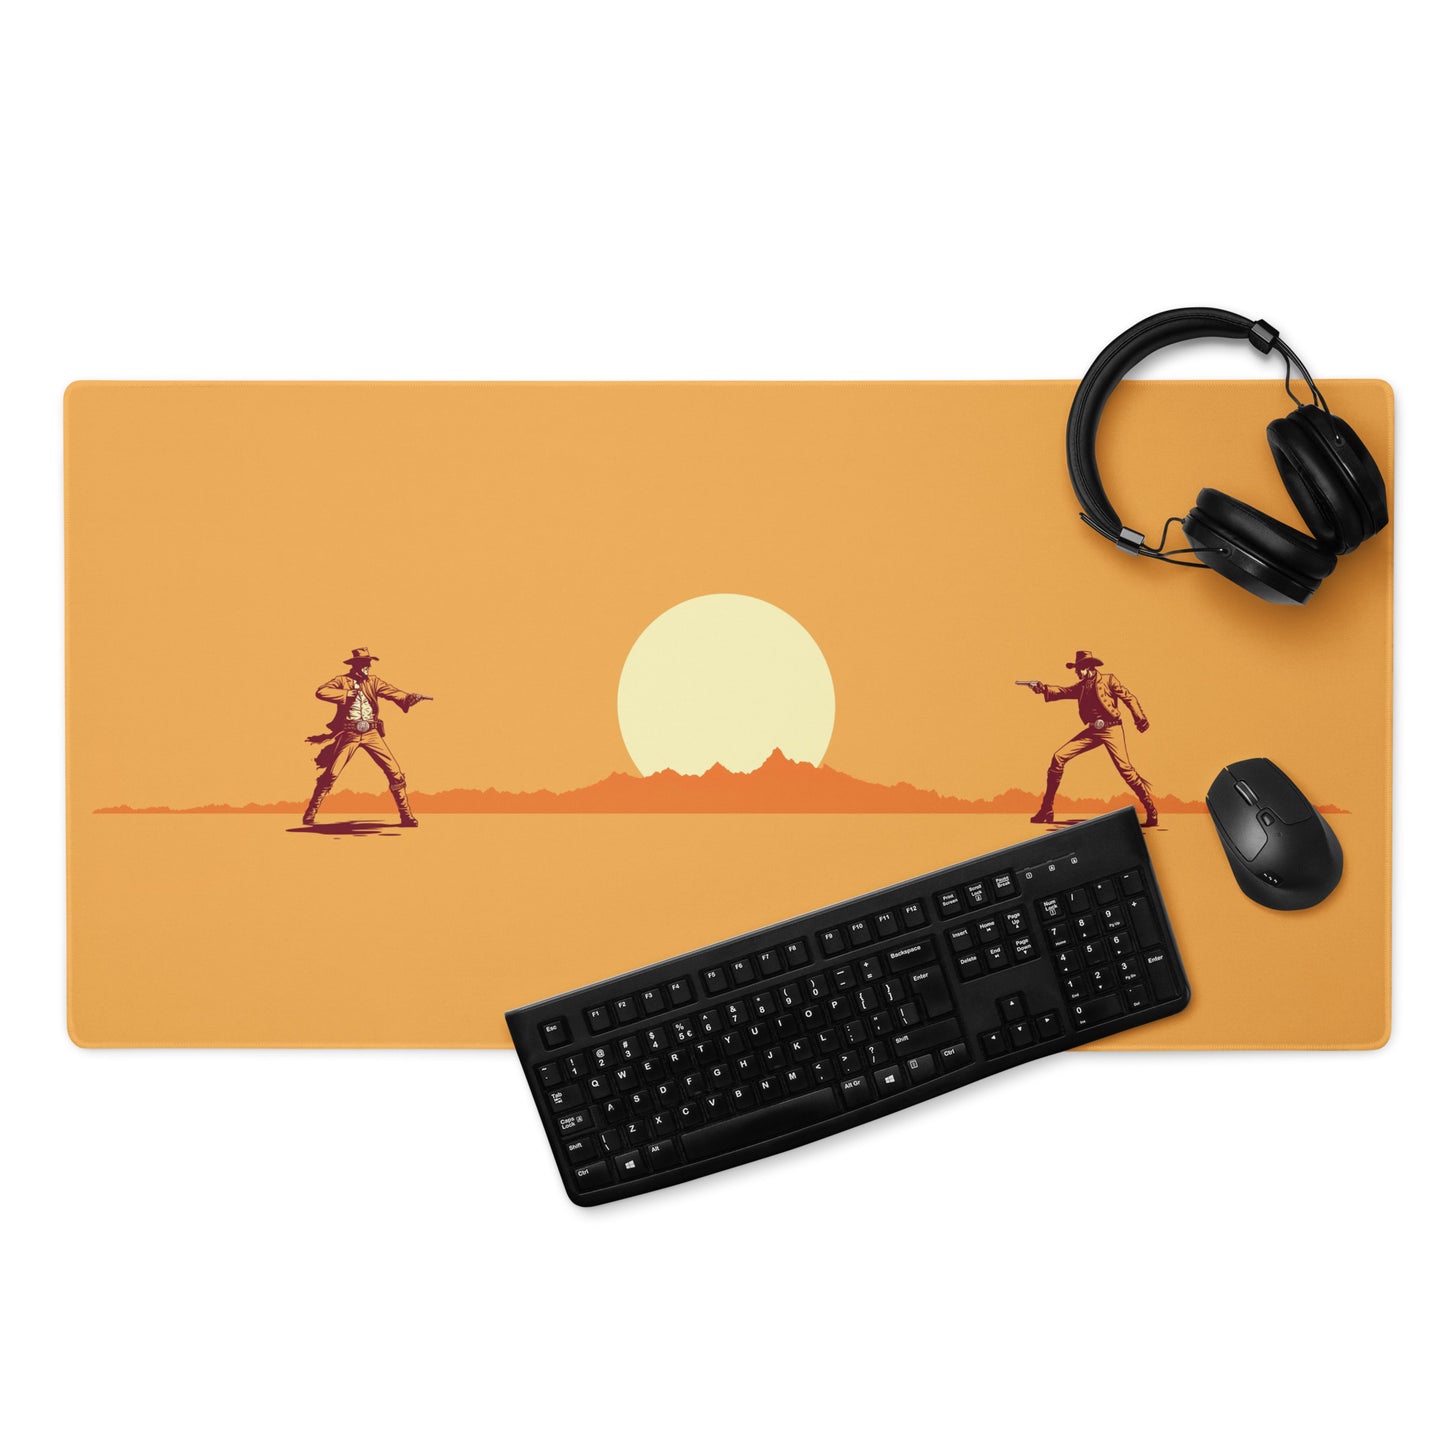 An orange 36" x 18" desk pad with cowboys dueling. With a keyboard, mouse, and headphones sitting on it.